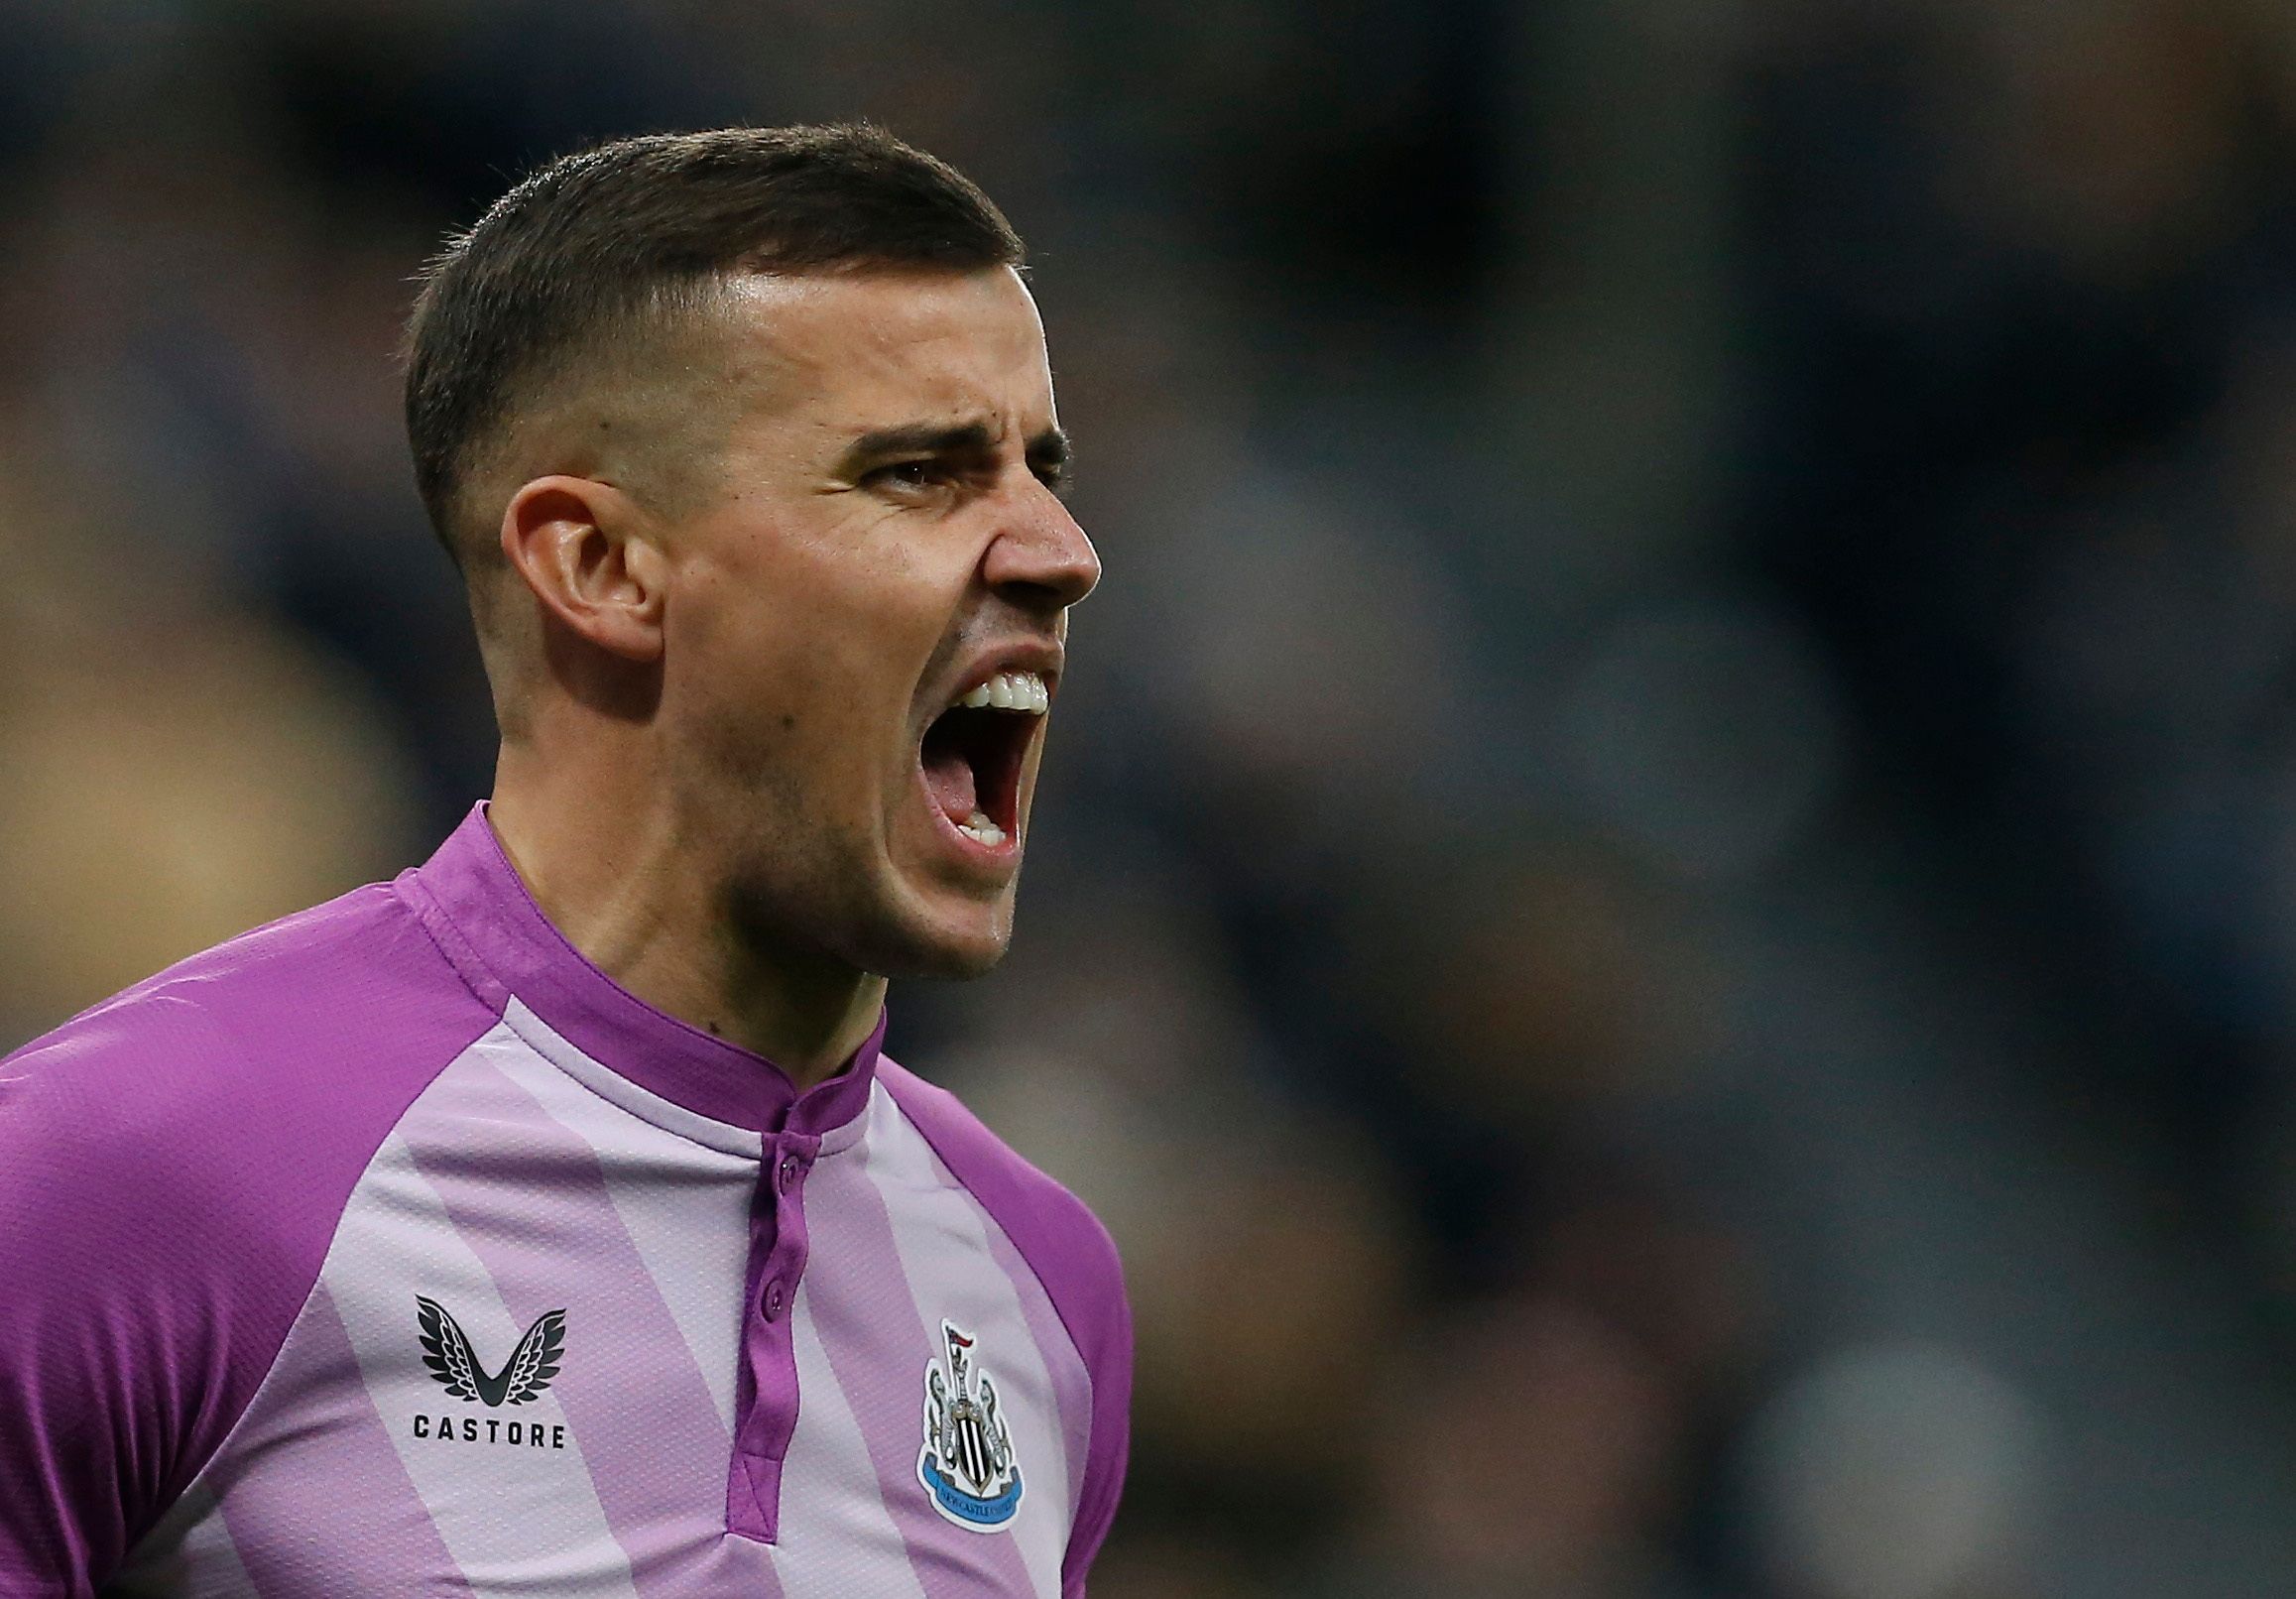 karl-darlow-west-brom-transfer-news-championship-steve-bruce-henderson-premier-league-darlow-pope-newcastle-united-transfer-news-west-brom-wba-nes-latestSoccer Football - Premier League - Newcastle United v Brentford - St James' Park, Newcastle, Britain - November 20, 2021 Newcastle United's Karl Darlow reacts REUTERS/Craig Brough EDITORIAL USE ONLY. No use with unauthorized audio, video, data, fixture lists, club/league logos or 'live' services. Online in-match use limited to 75 images, no vide